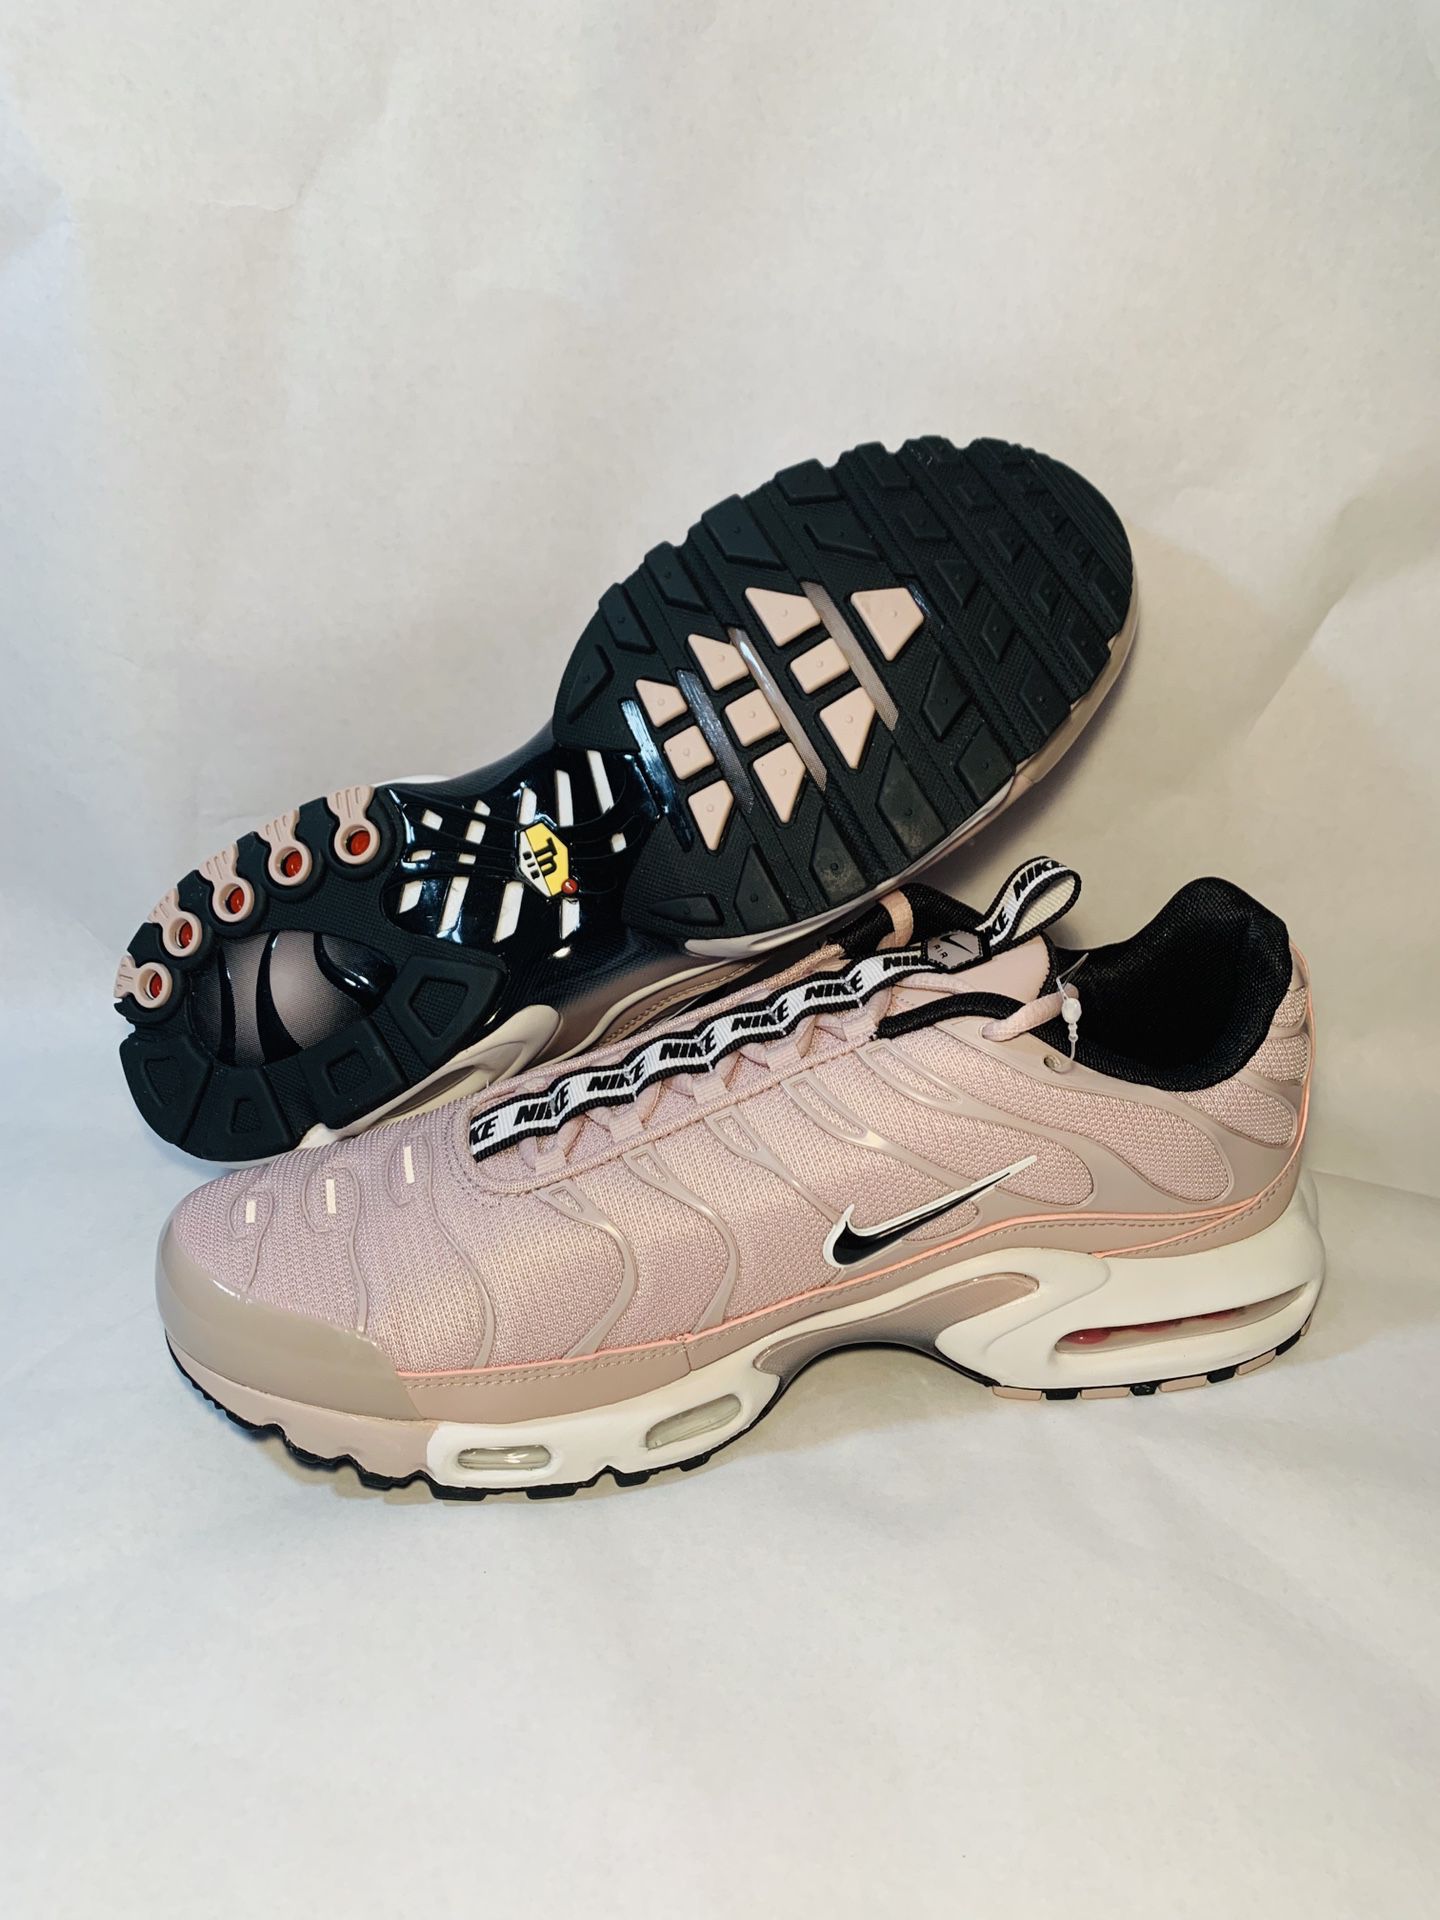 ik draag kleding Dagelijks Politieagent NIKE AIR MAX PLUS TN SE TAPED PARTICLE ROSE/WHITE/BLACK [AQ4128-600] MEN'S  SZ: 13 Condition is new with box, 100% Guaranteed Authentic Fast shipping  for Sale in Dundalk, MD - OfferUp